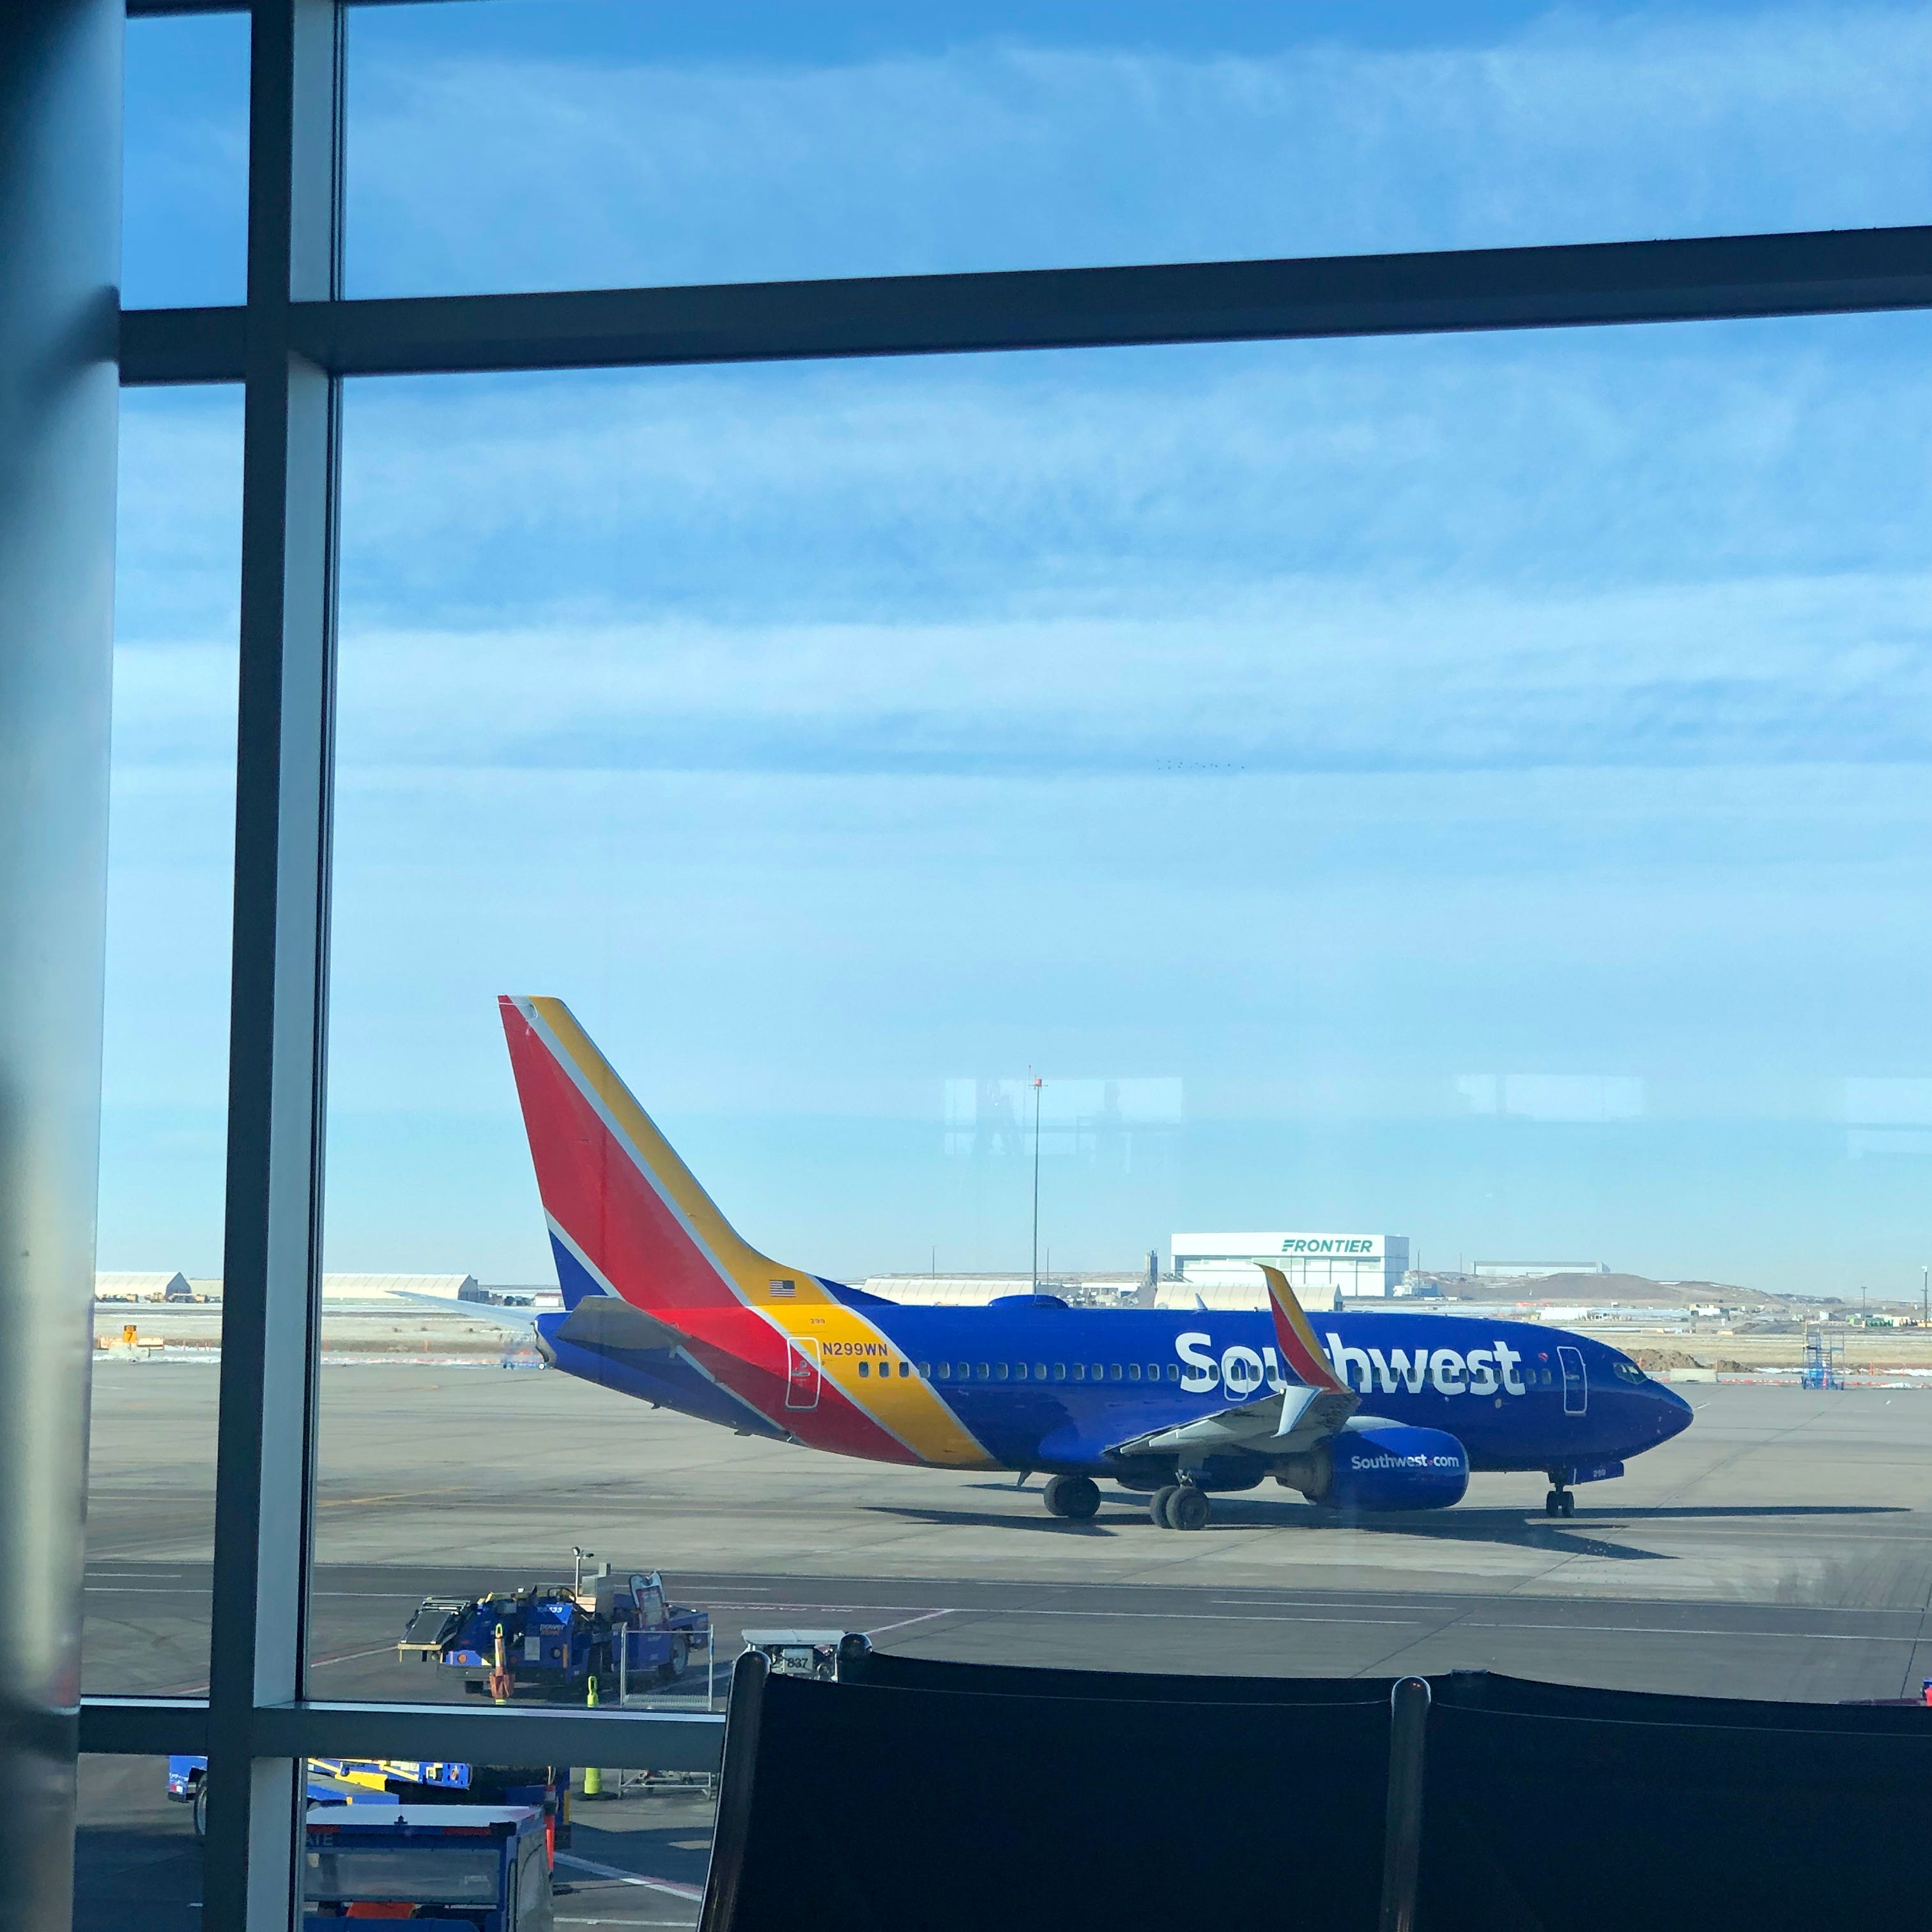 A Southwest Airlines plane at Denver International Airport on Feb. 5, 2023.